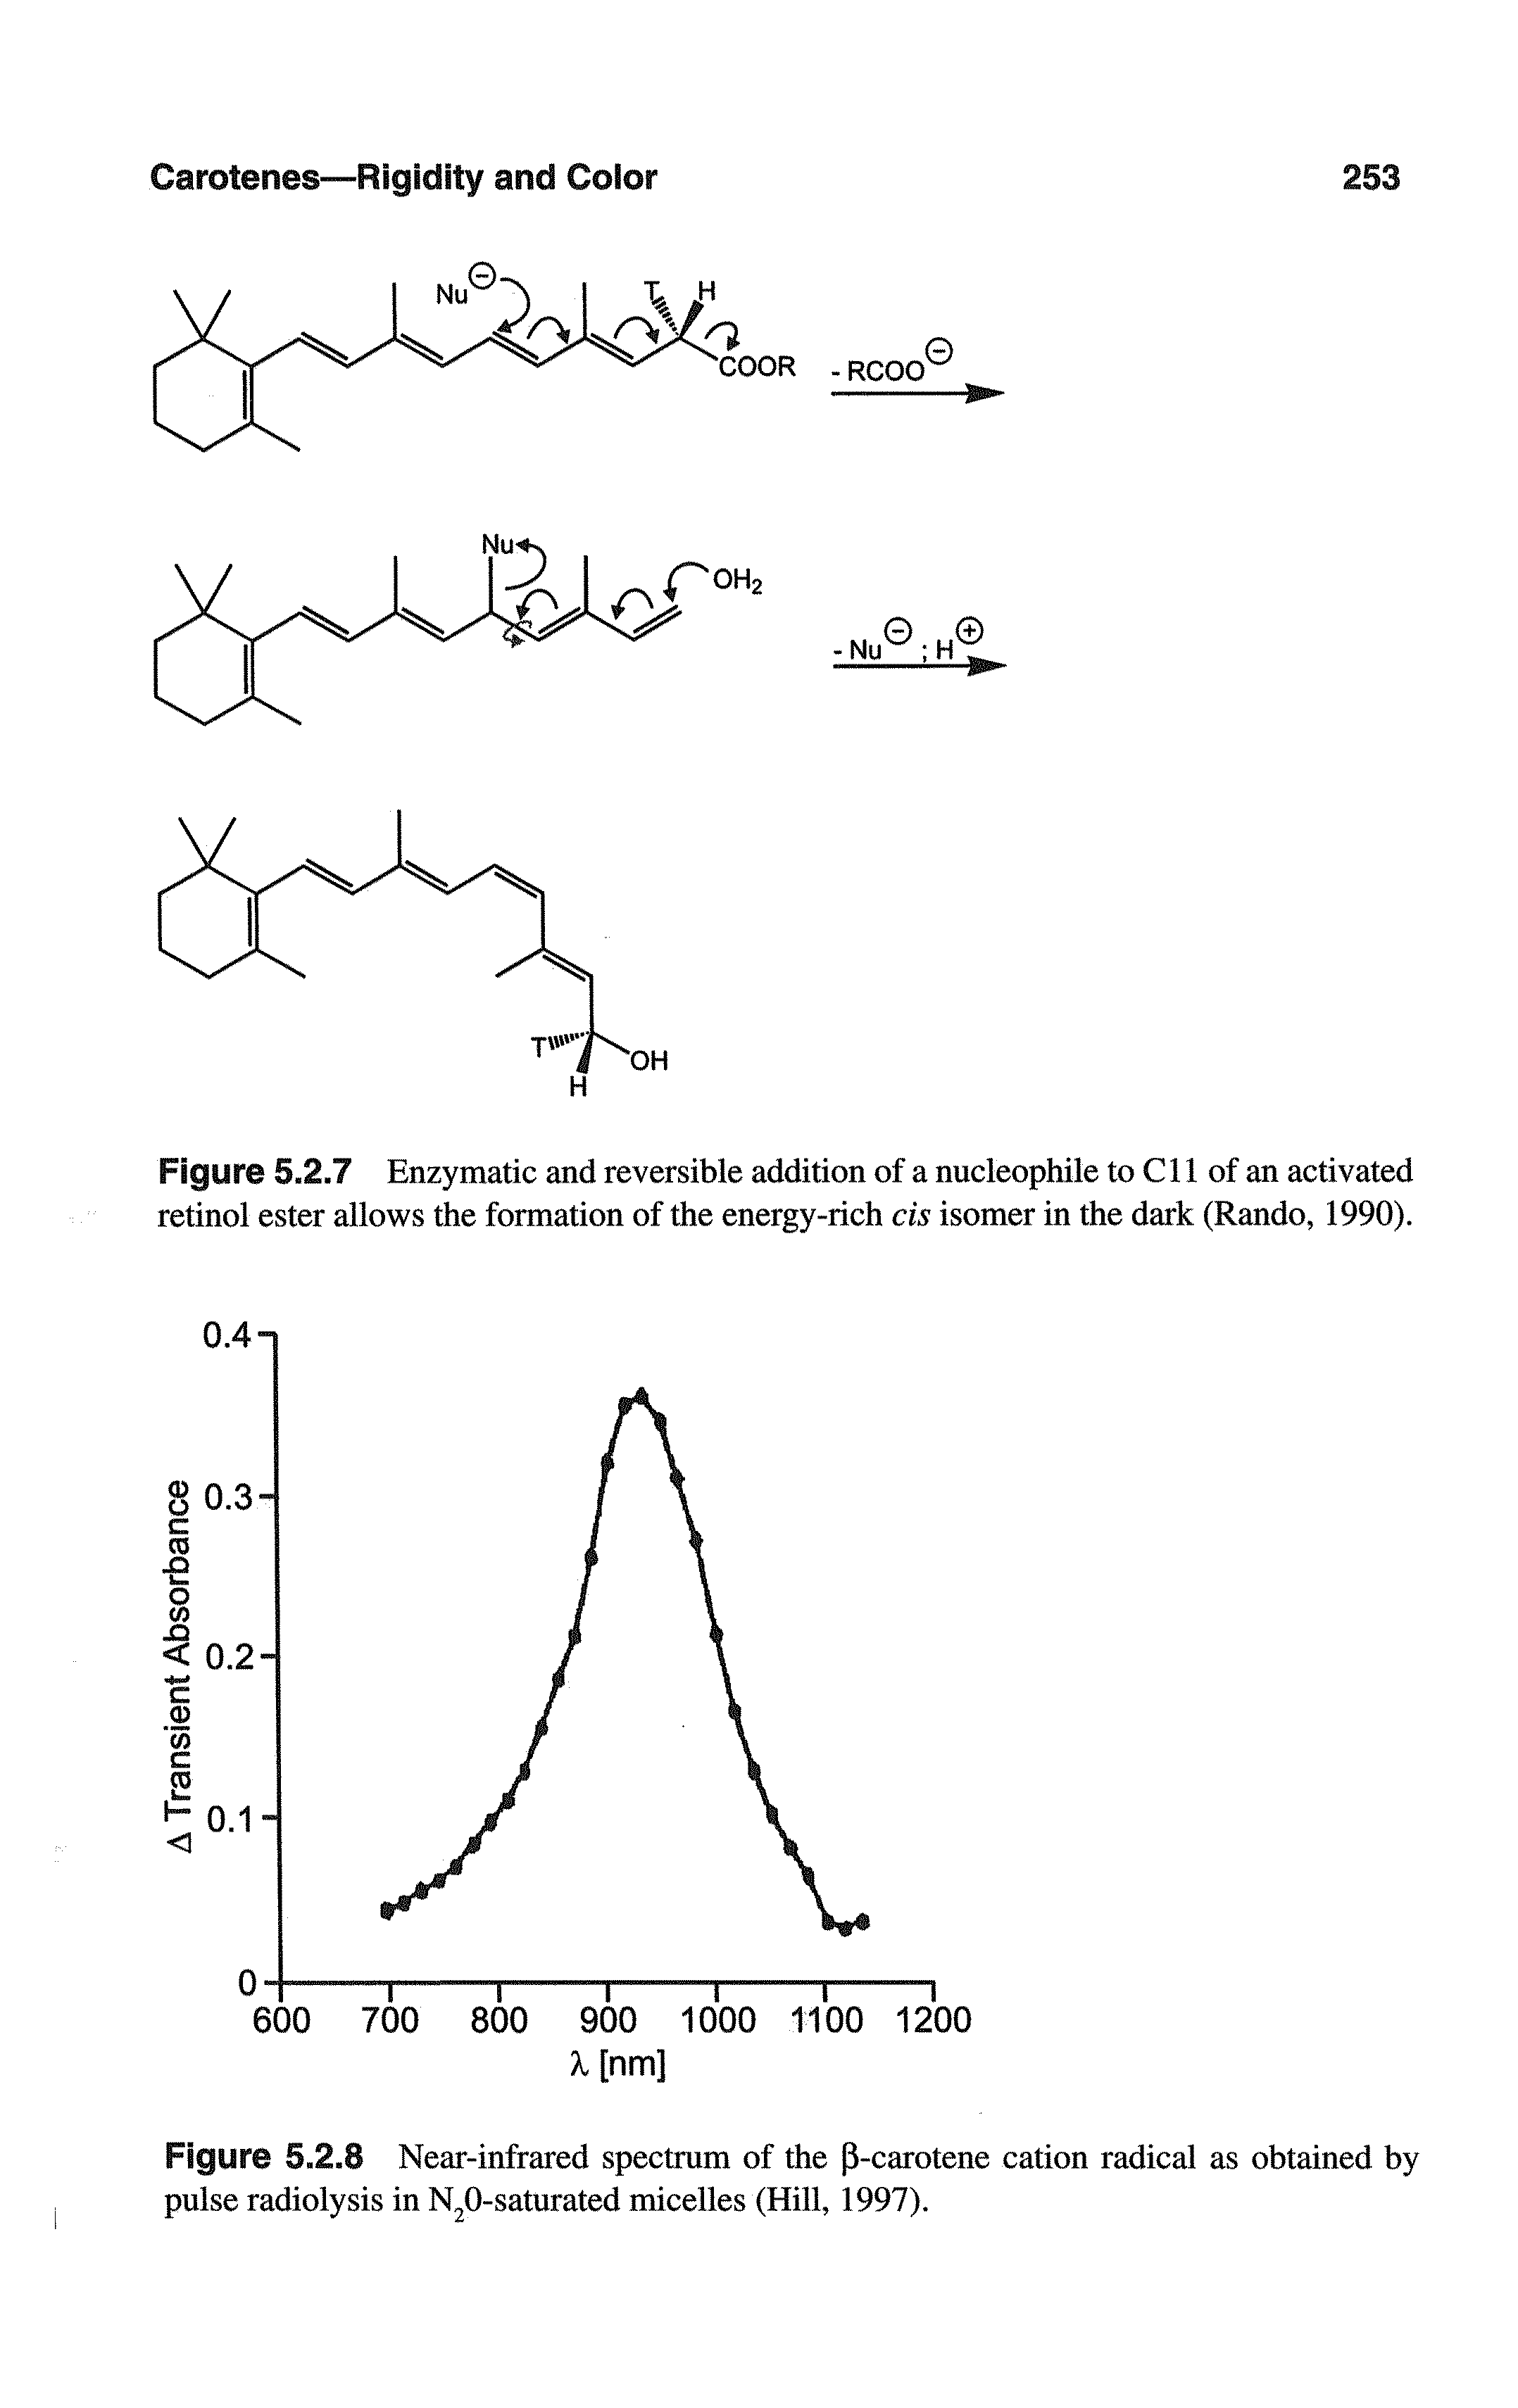 Figure 5.2.7 Enzymatic and reversible addition of a nucleophile to Cll of an activated retinol ester allows the formation of the energy-rich cis isomer in the dark (Rando, 1990).